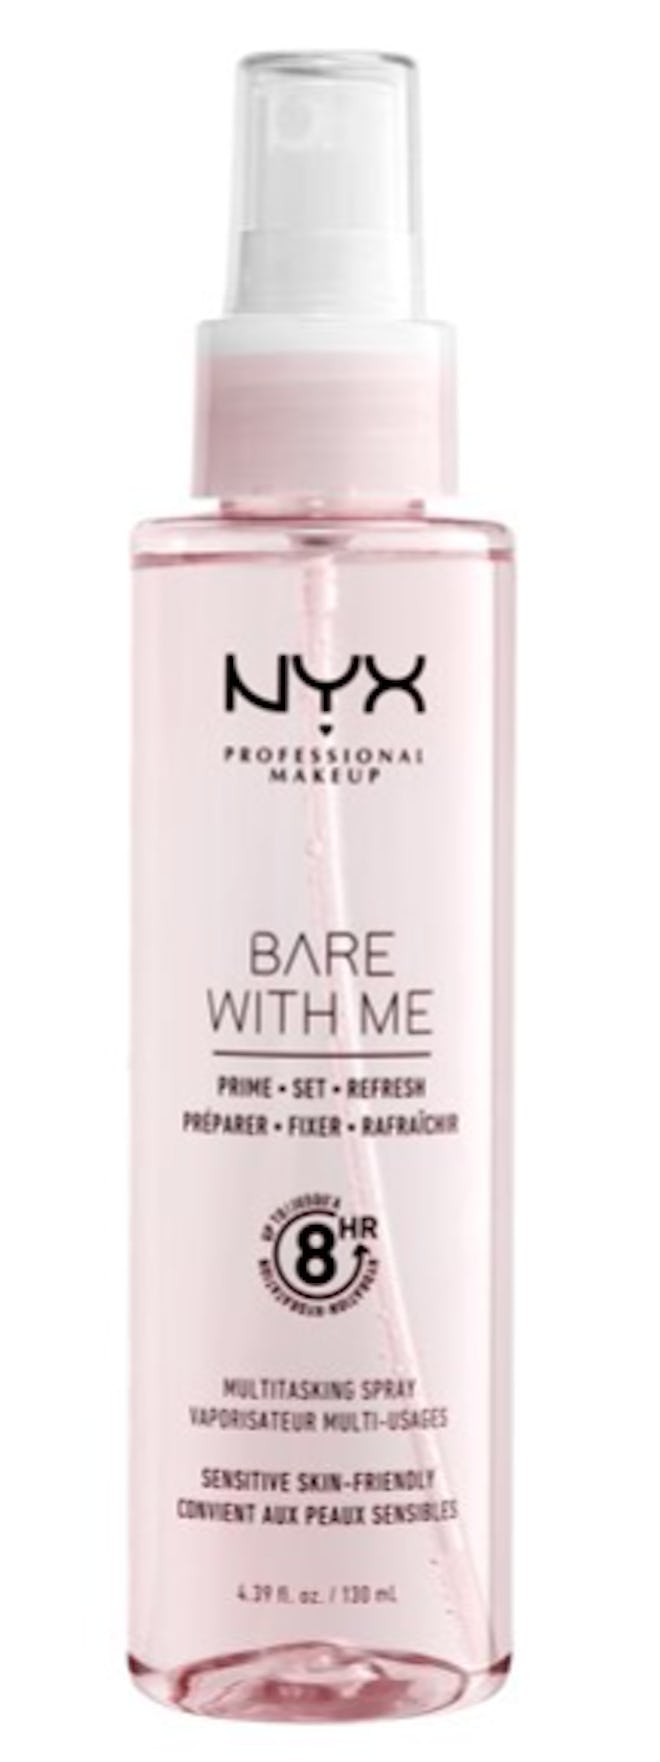 Bare With Me Multitasking Setting Spray and Face Makeup Primer